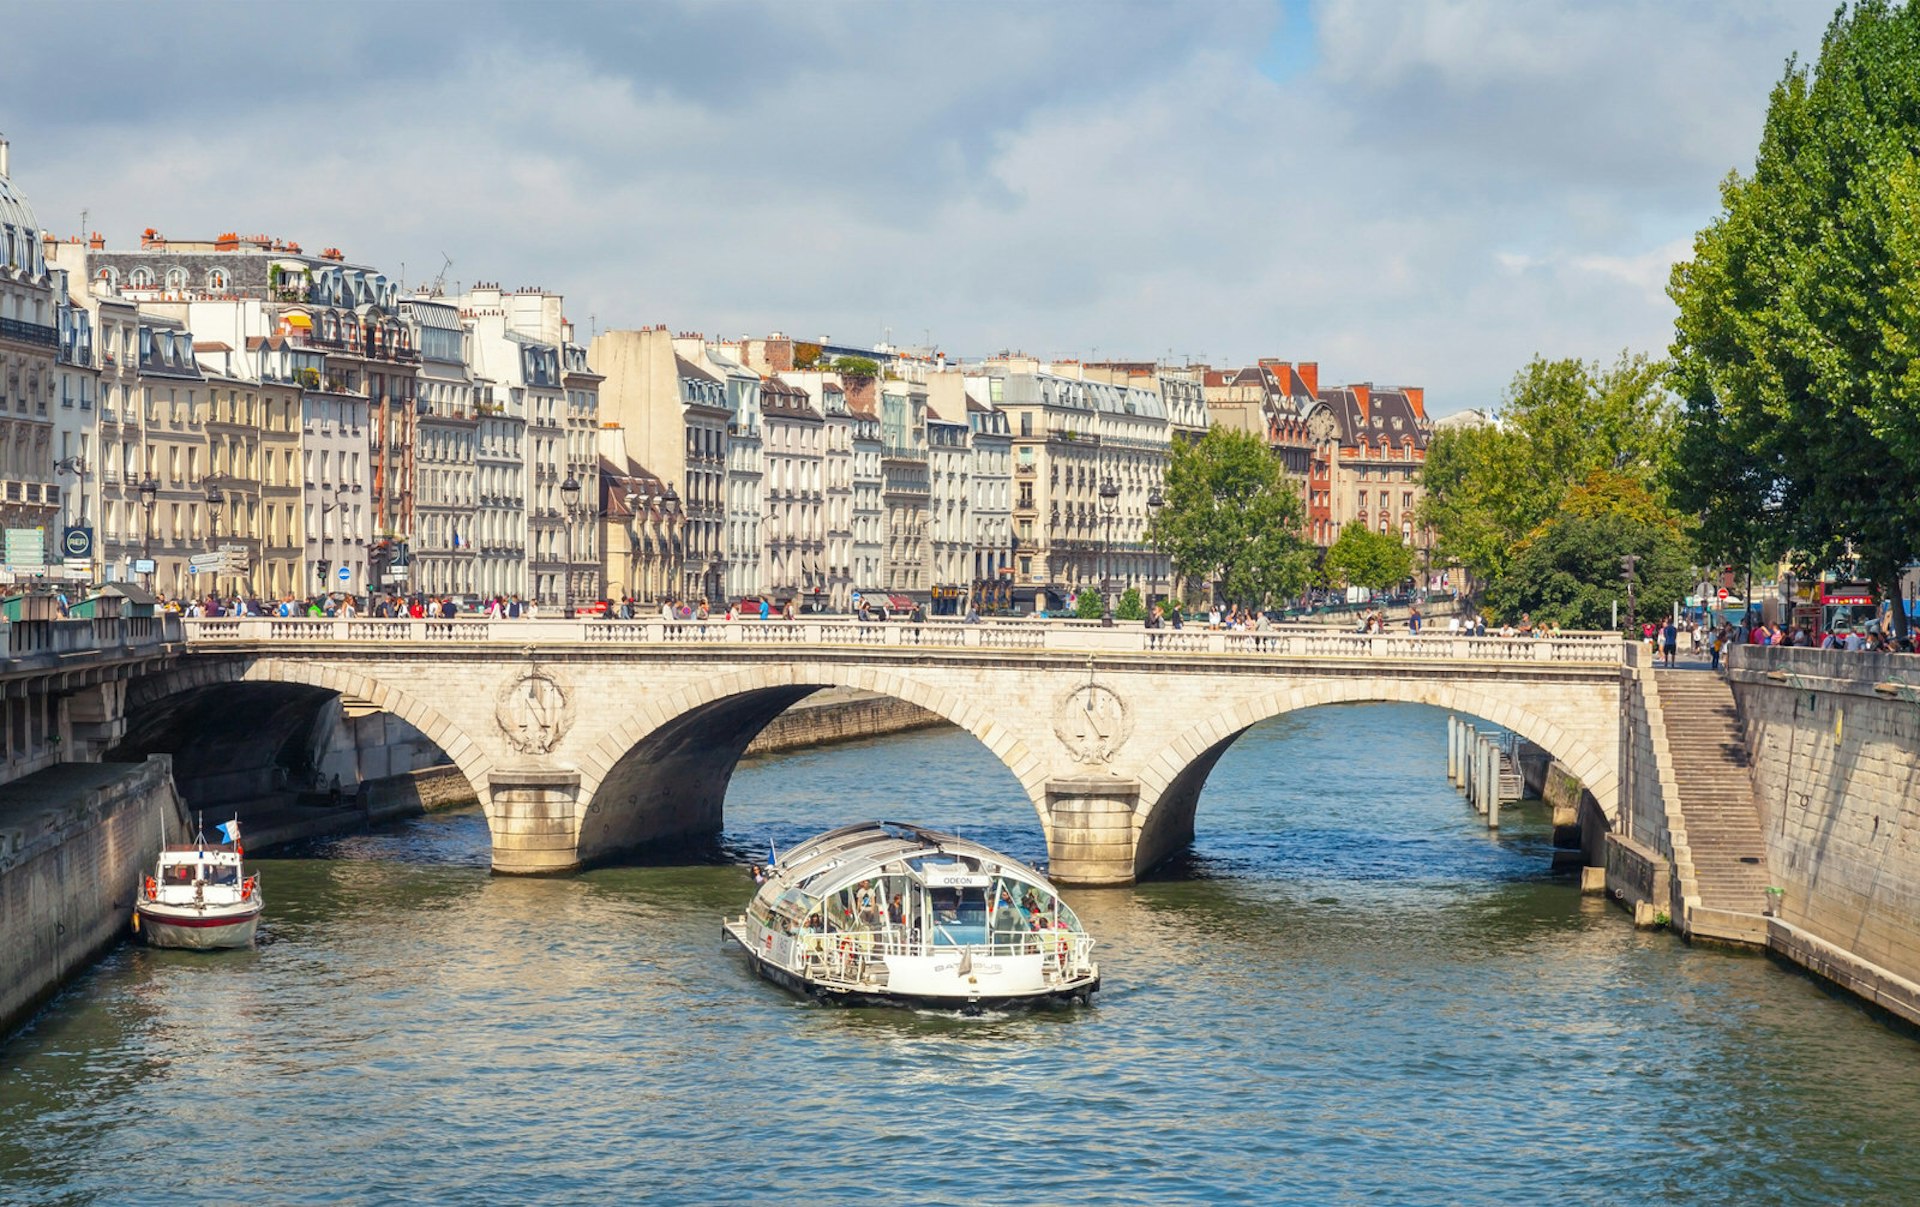 A Batobus tourist boat sailing under the stone arched Pont Neuf in Paris; on the left hand side of the river are handsome period buildings while the right hand side is lined with trees.